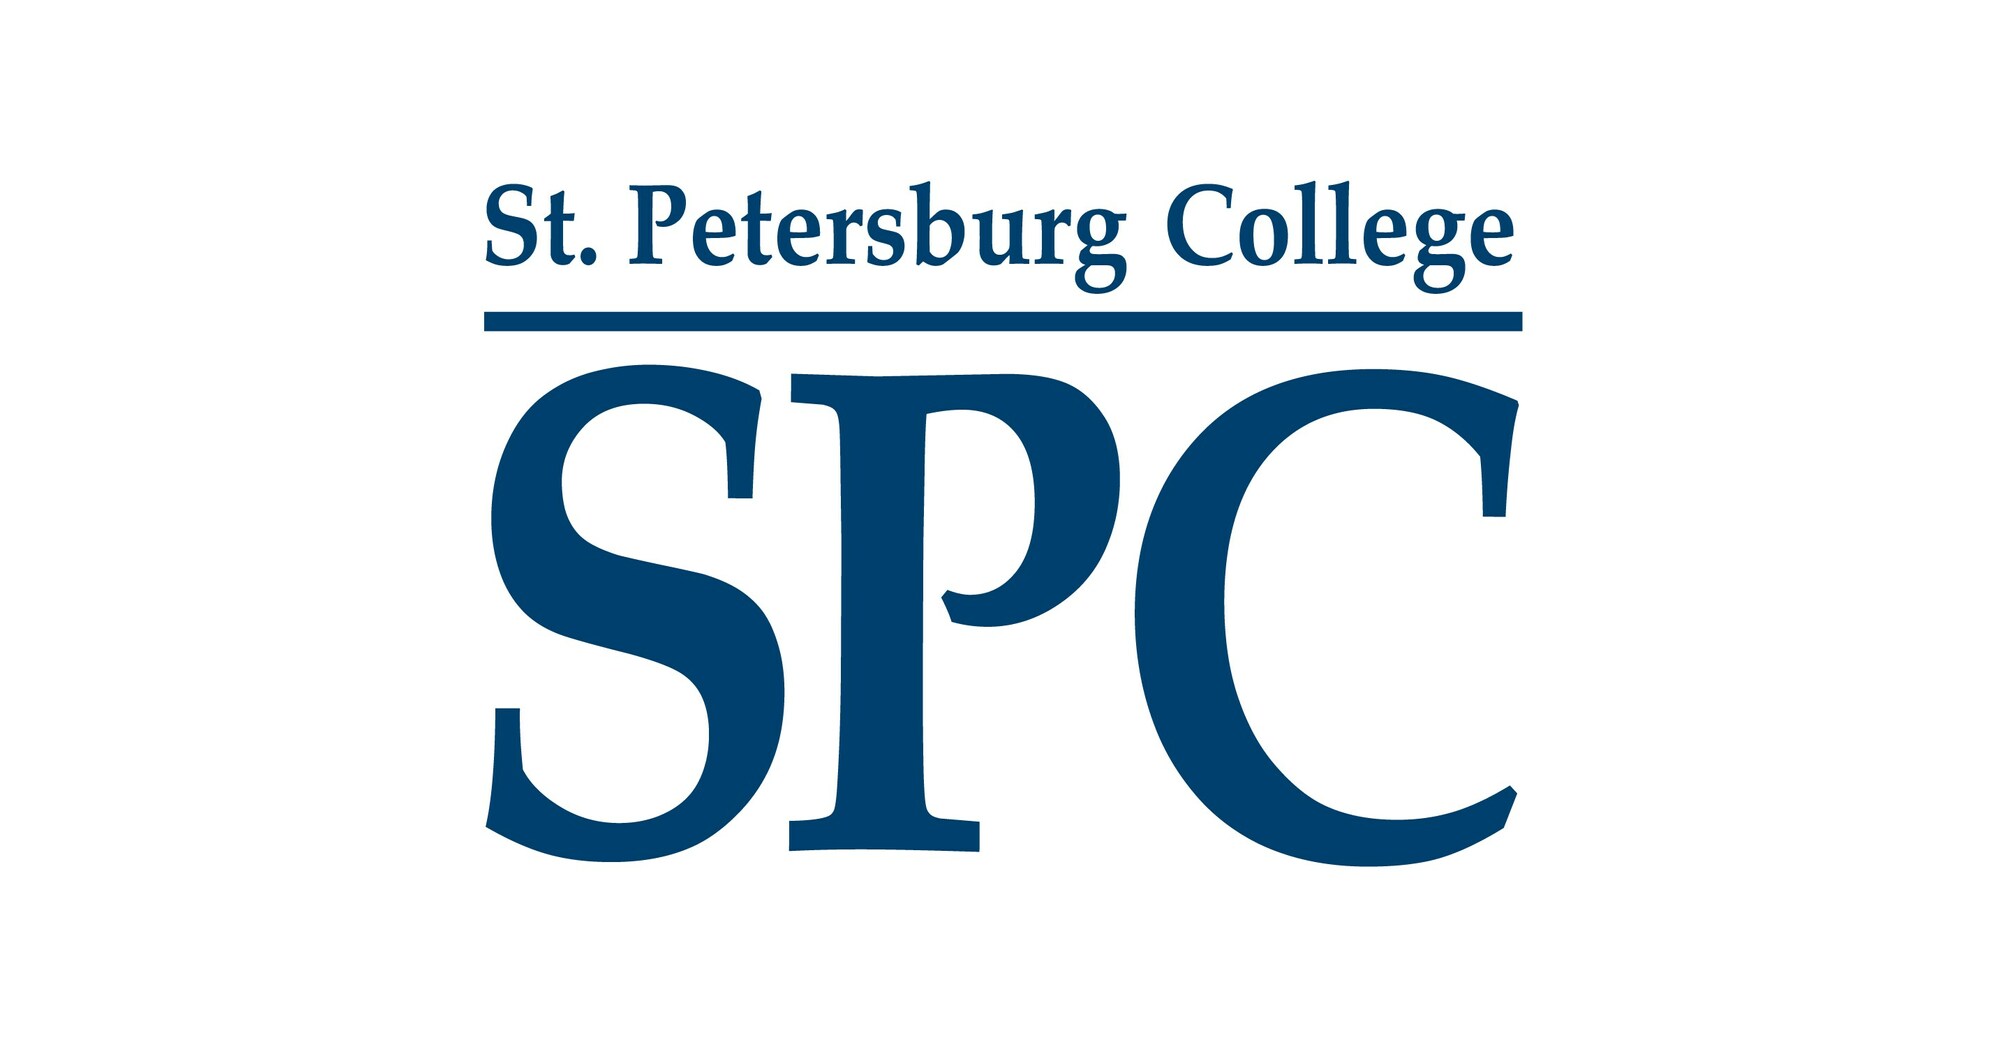  St. Petersburg College Prepares Students for High-Demand Jobs in the Semiconductor Industry 